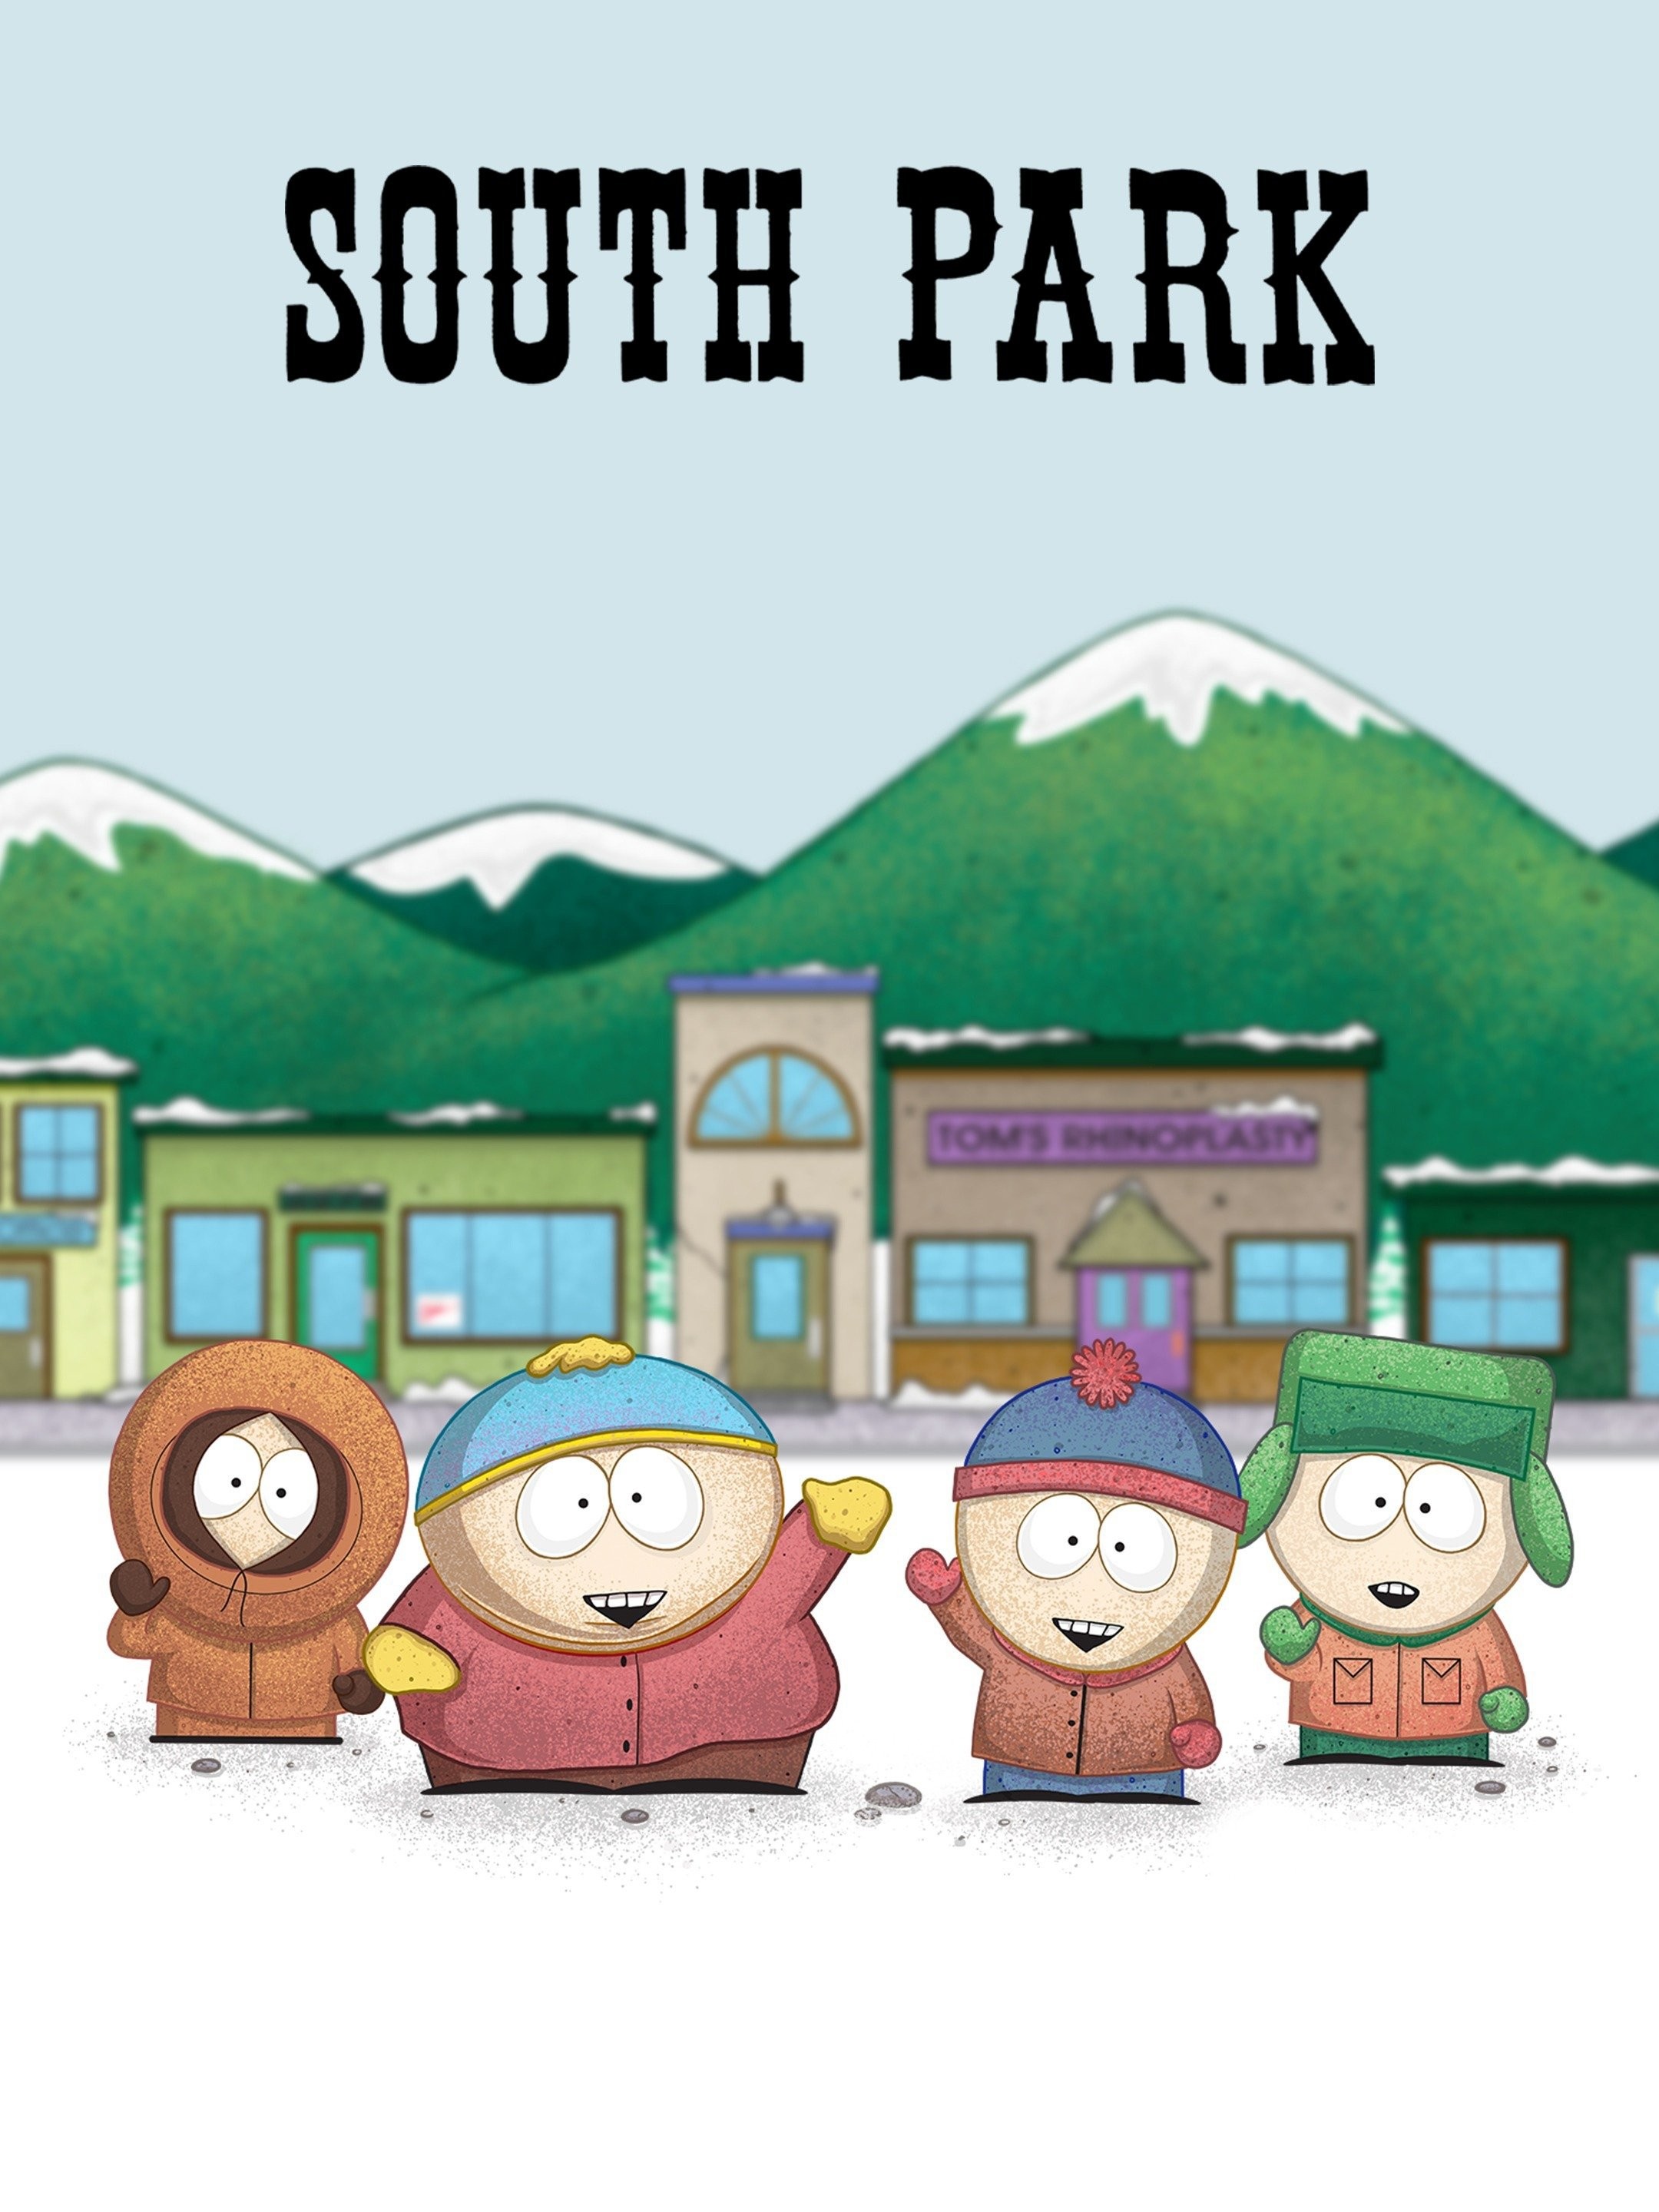 Prime Video: South Park: The Streaming Wars